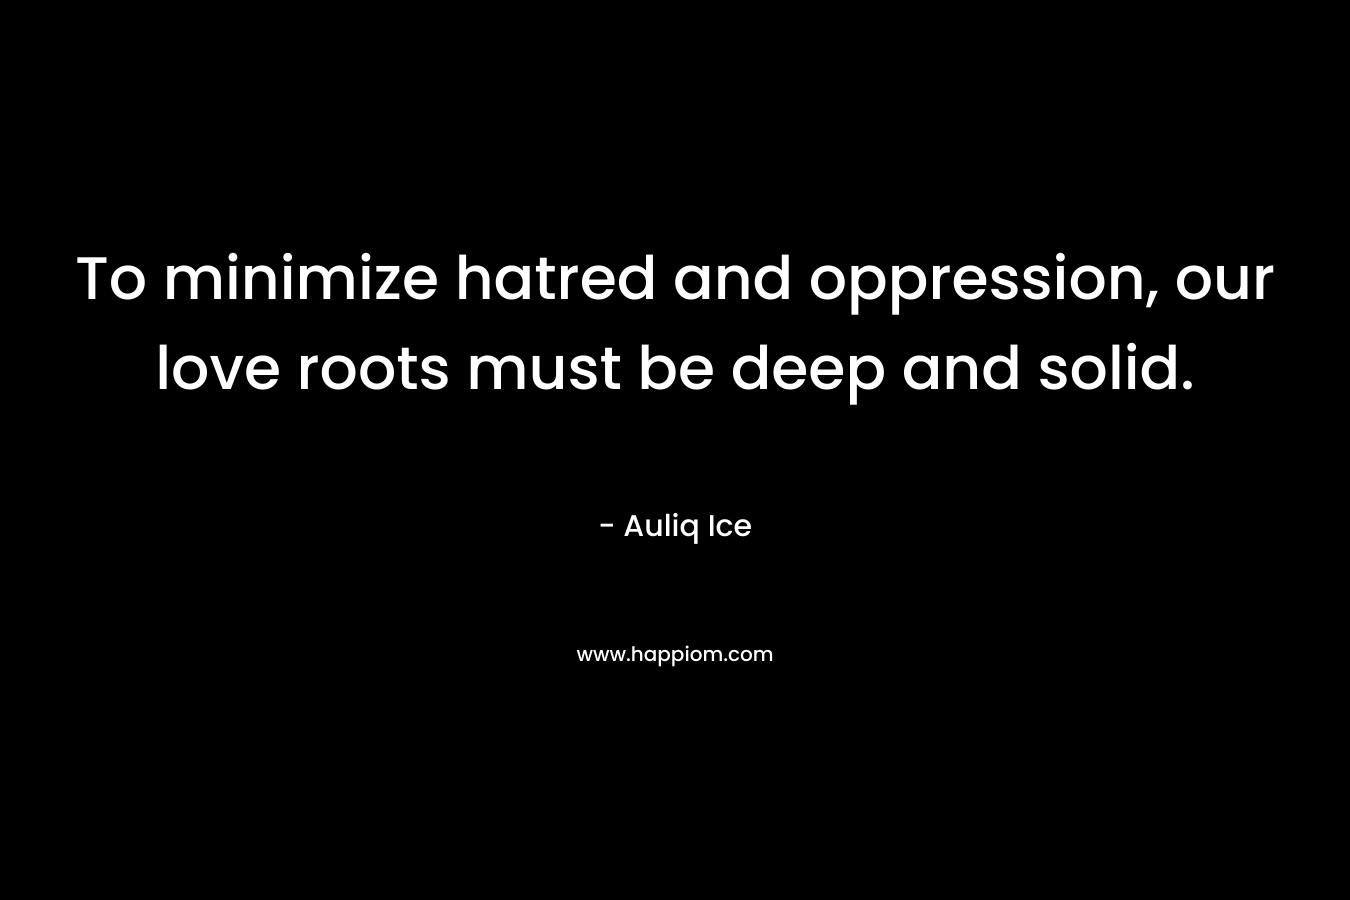 To minimize hatred and oppression, our love roots must be deep and solid. – Auliq Ice